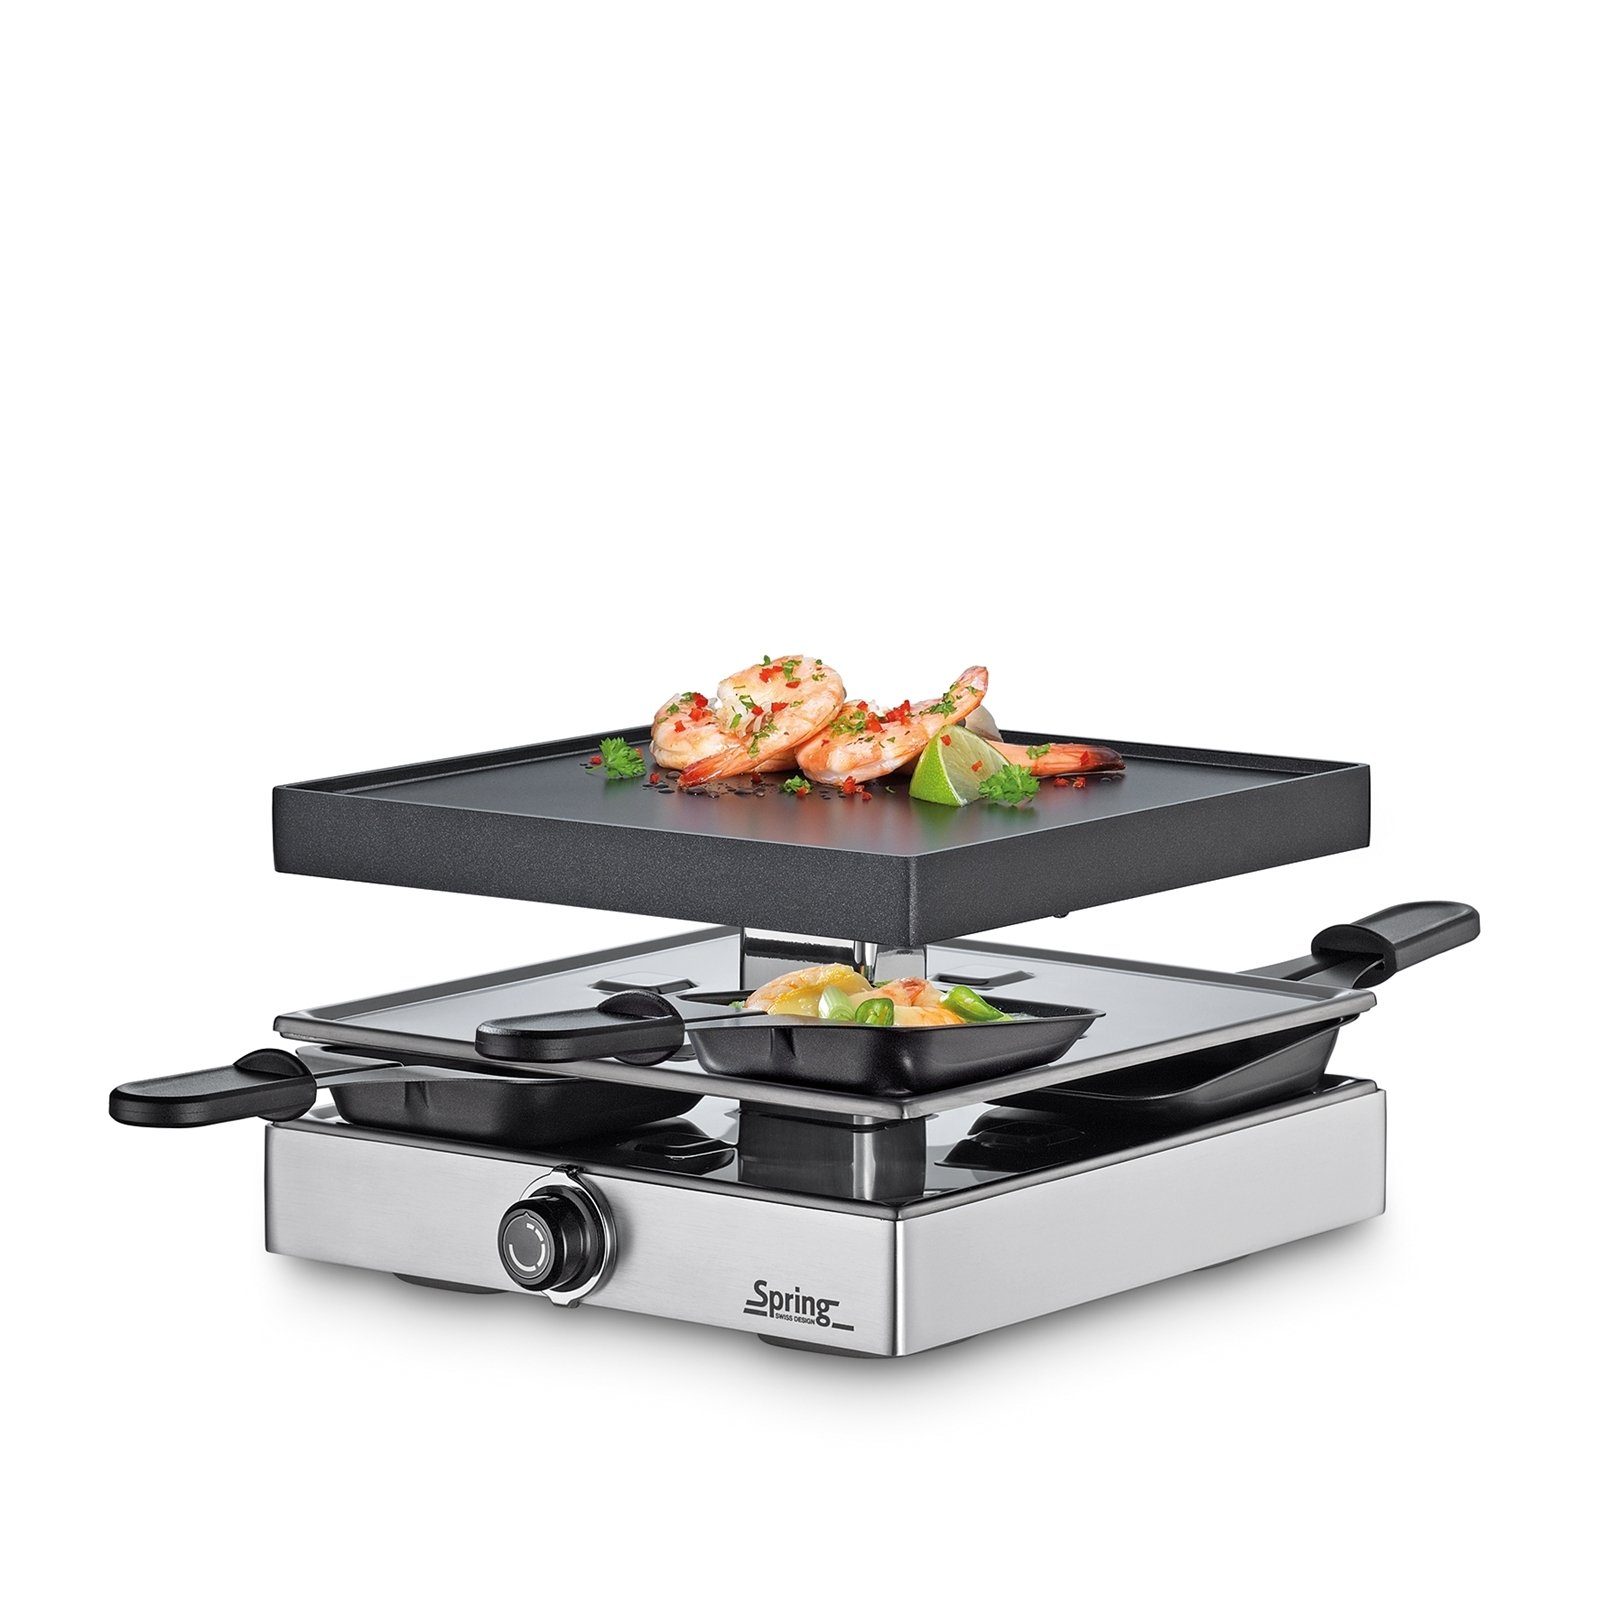 4 Alugrillplatte Classic Spring mit Silber Raclette Raclette